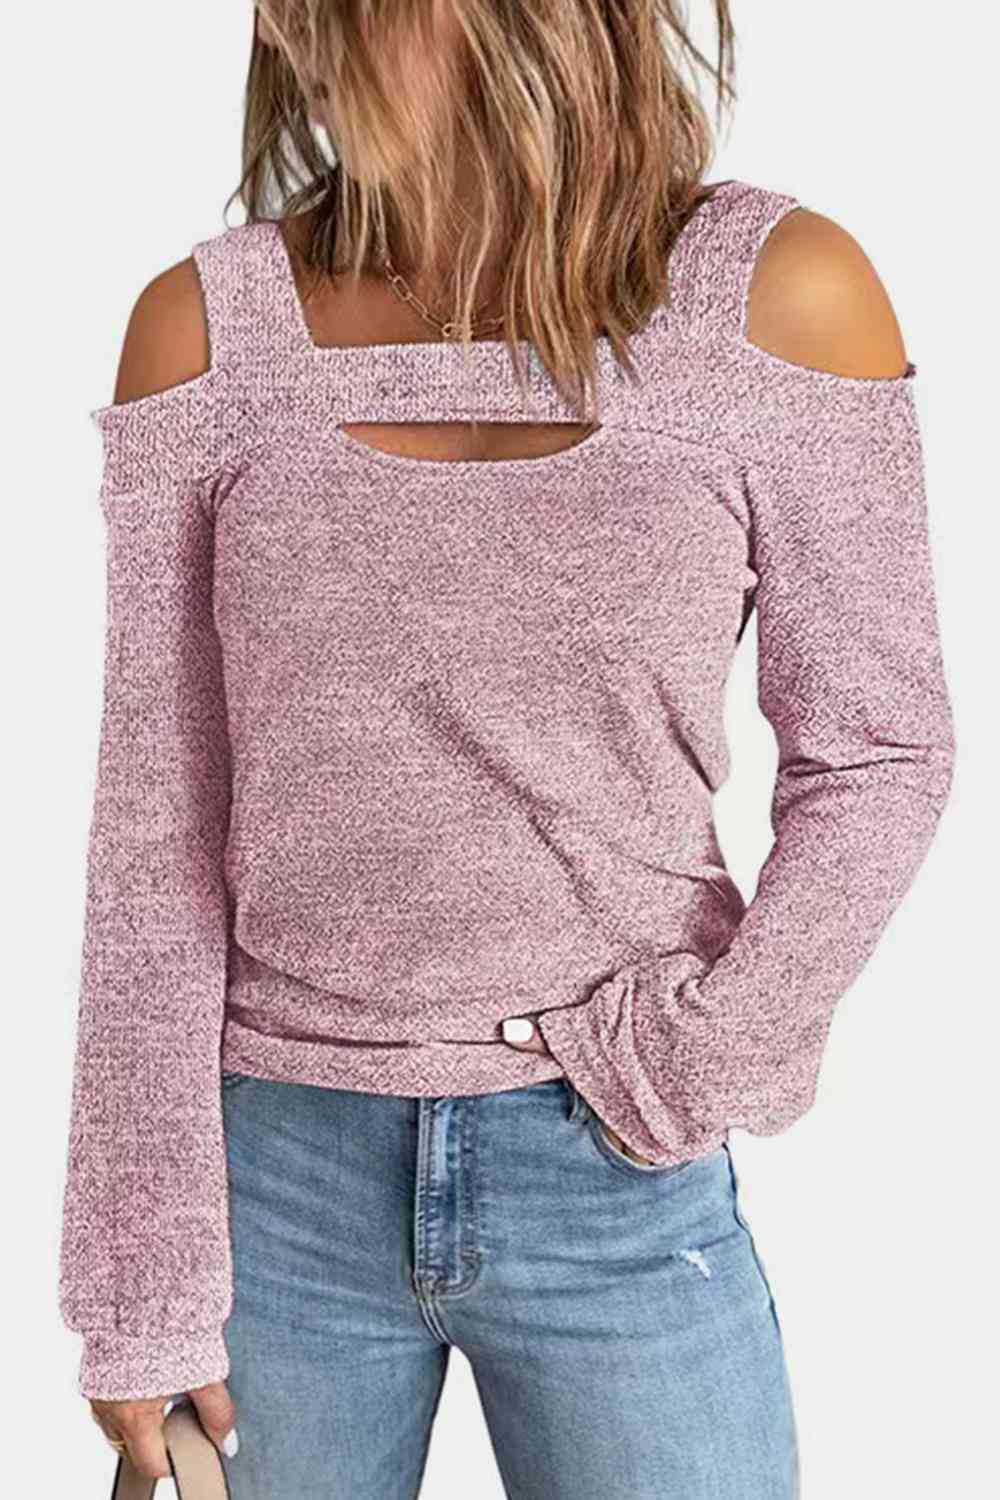 Full Size Cutout Cold Shoulder Blouse Heather Gray